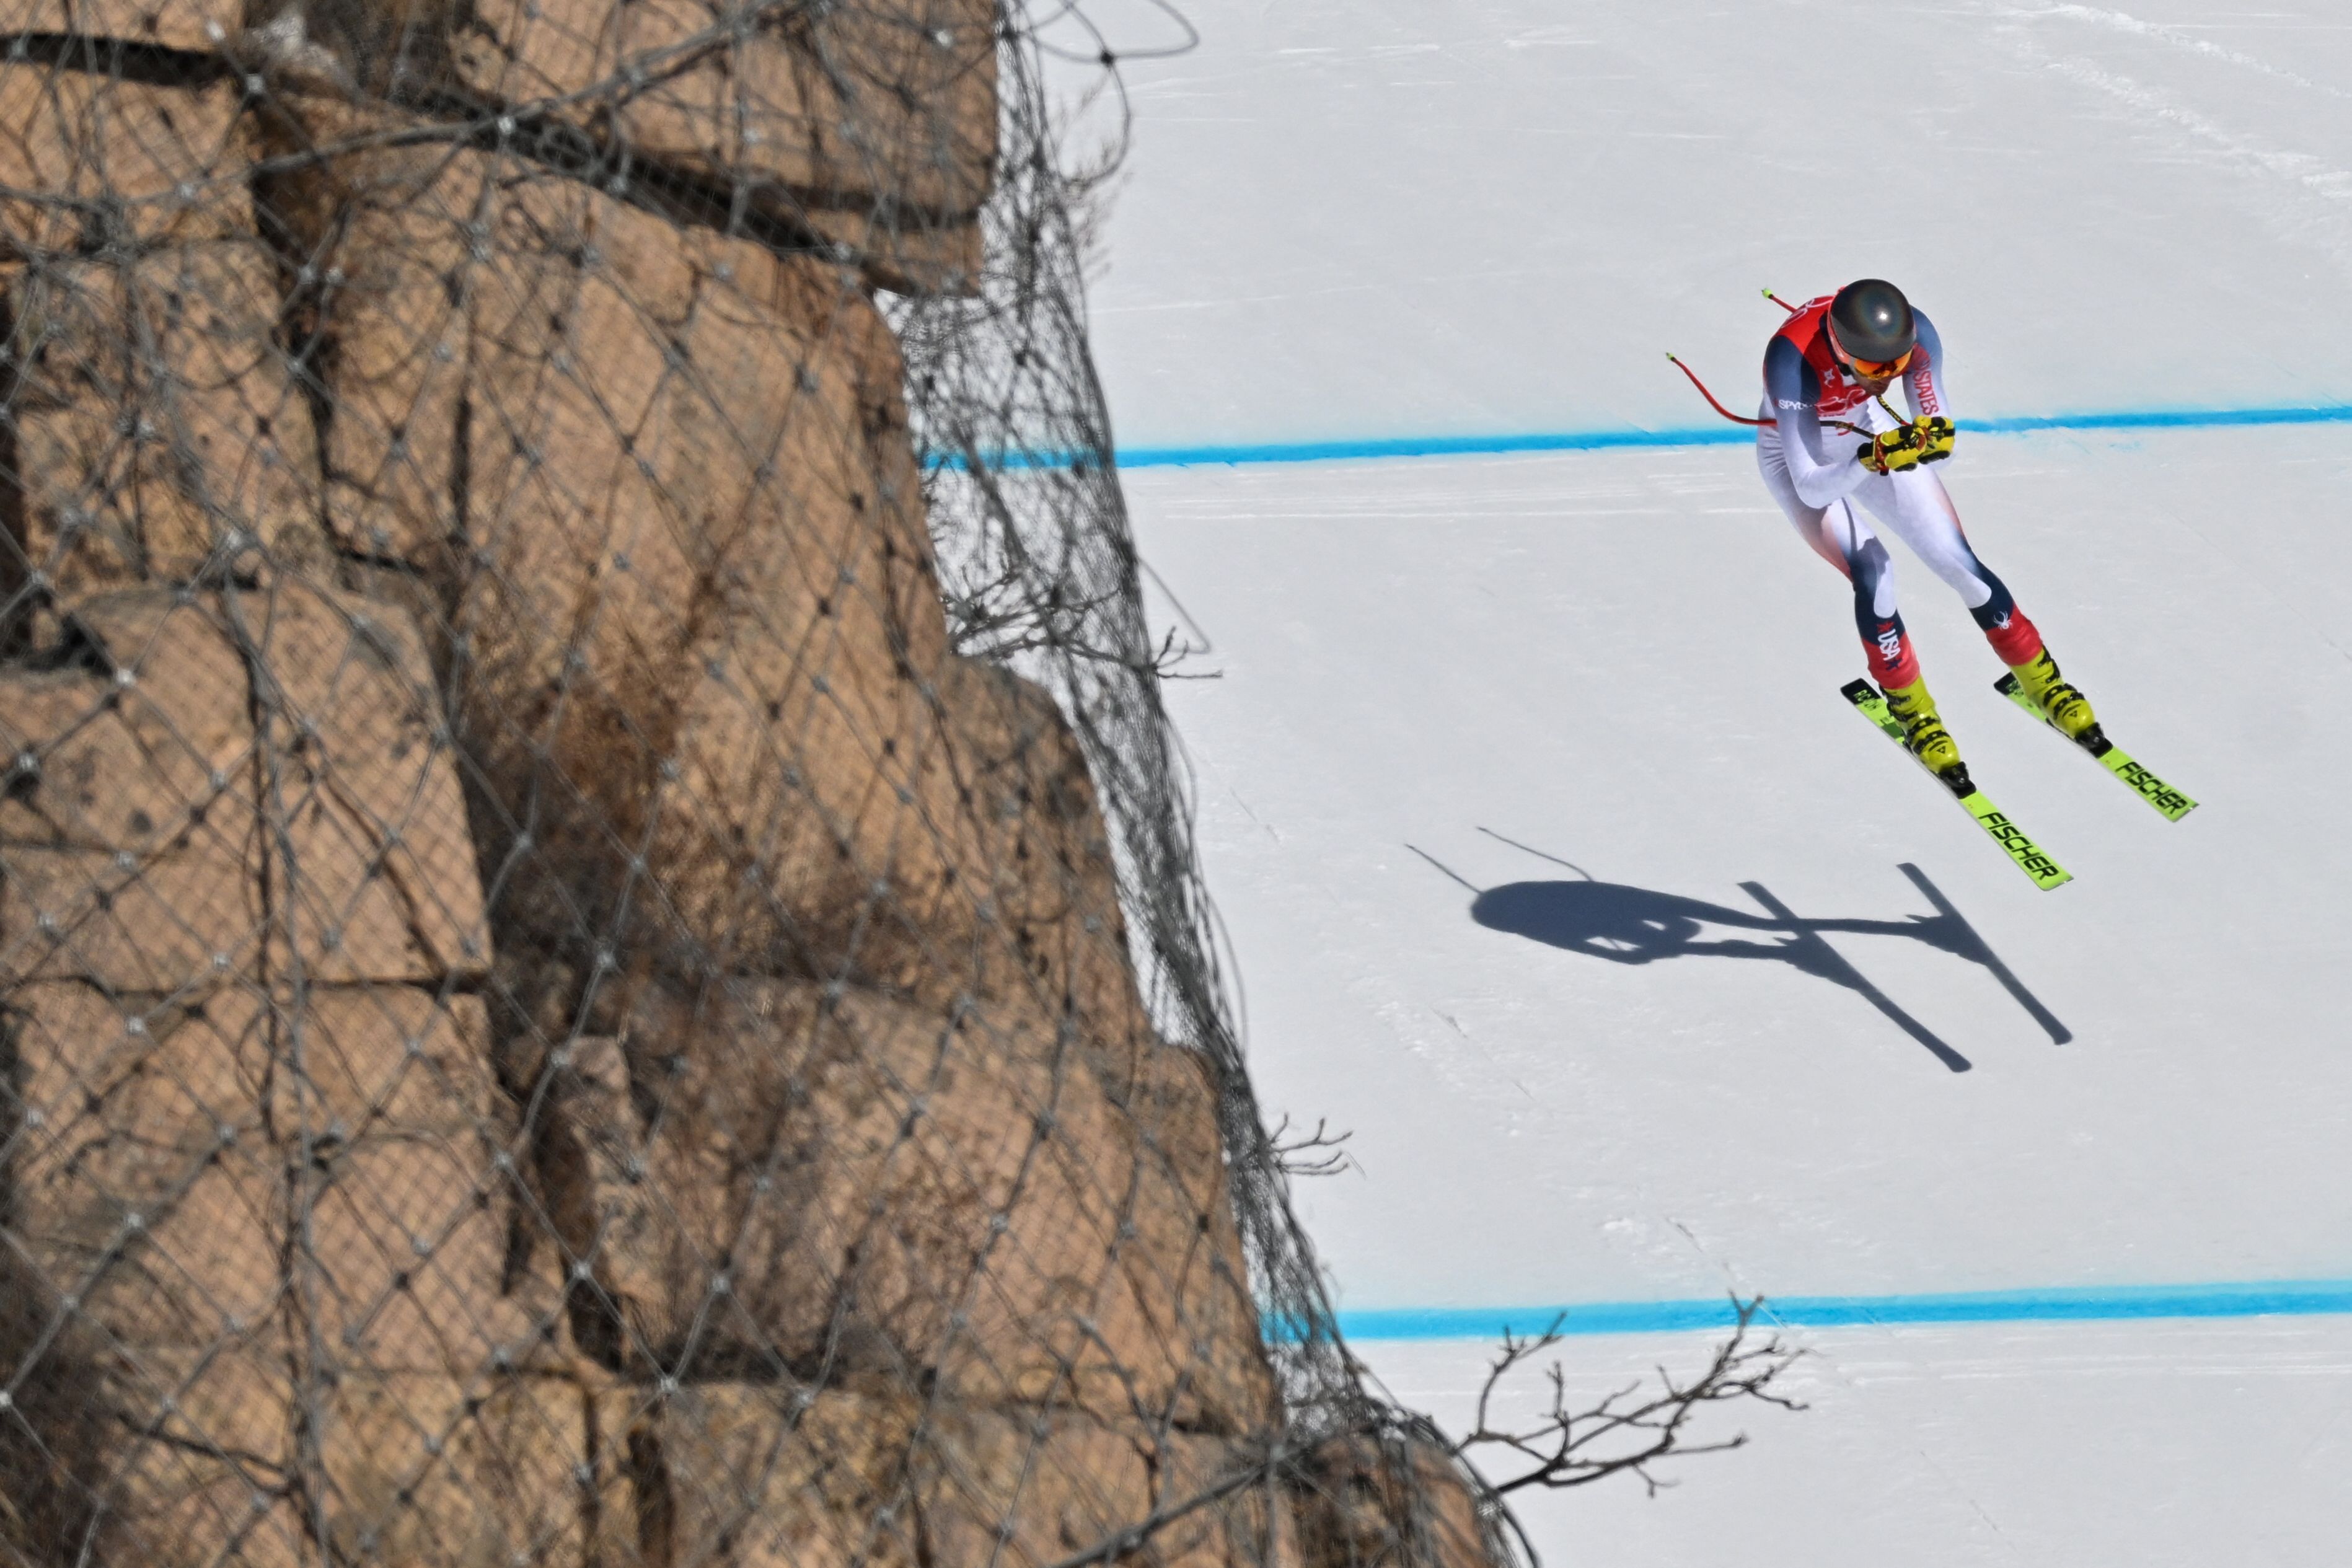 USA's Bryce Bennett competes in the mens downhill final during the Beijing 2022 Winter Olympic Games at the Yanqing National Alpine Skiing Centre in Yanqing on February 7